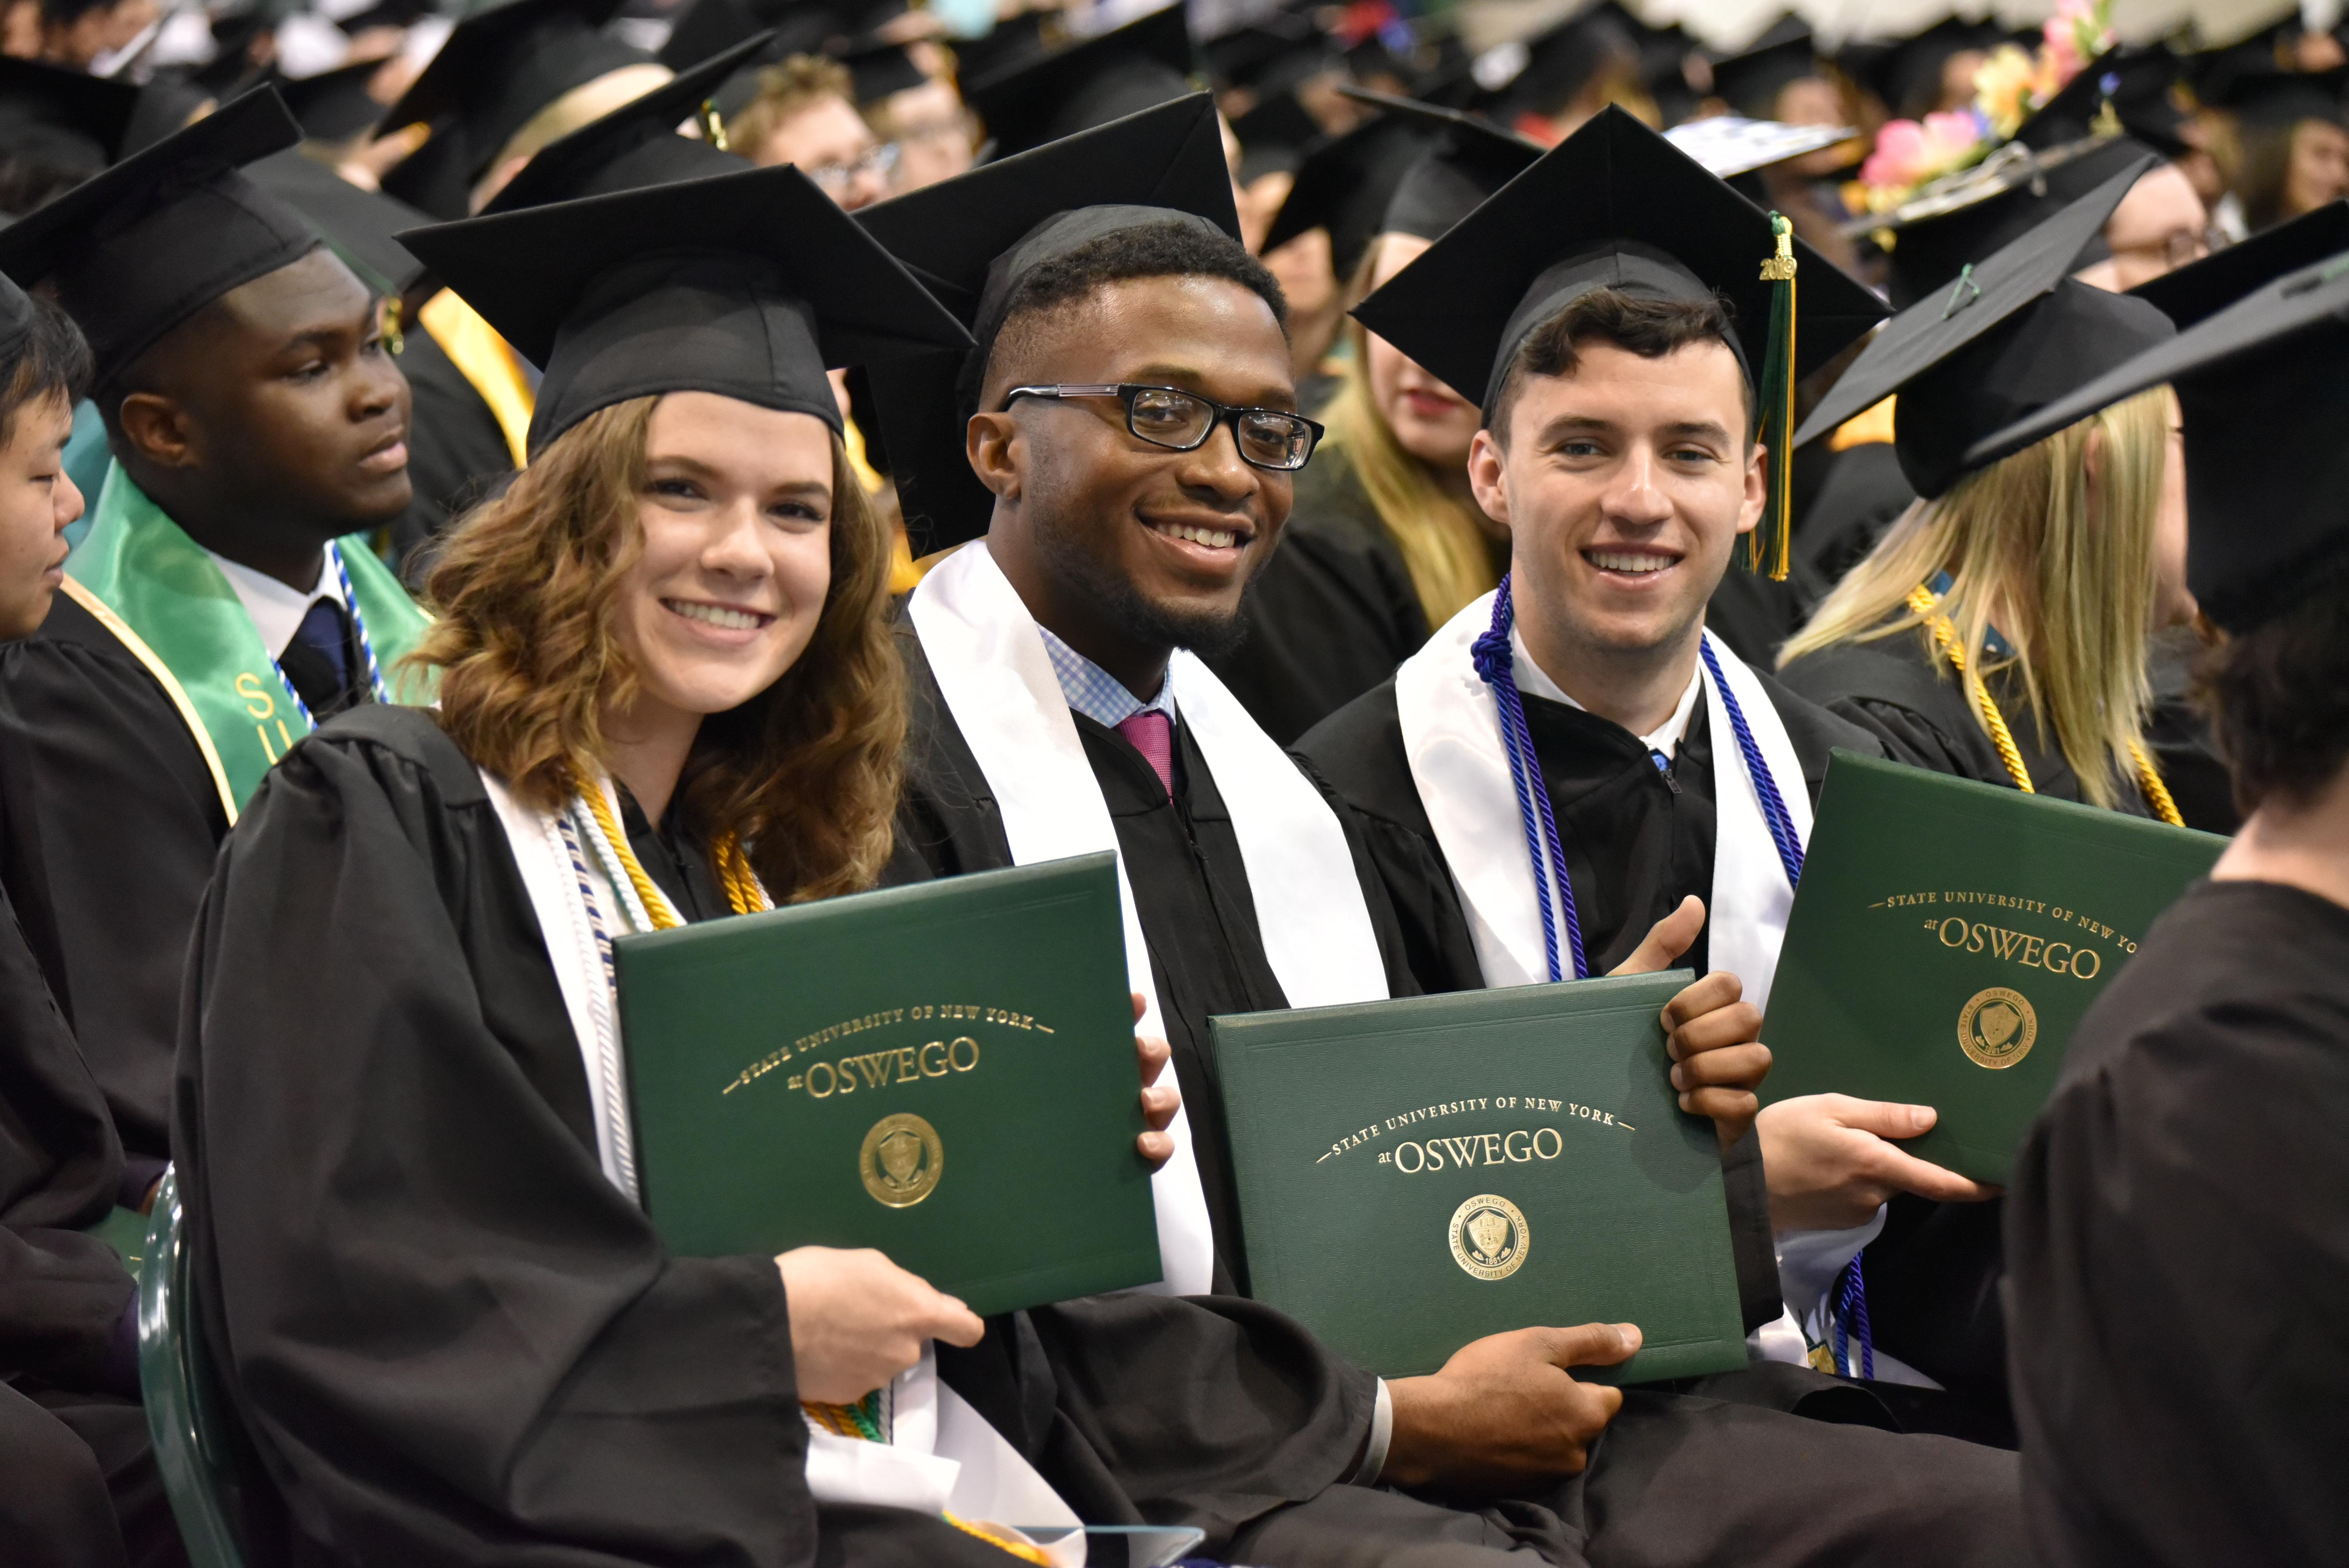 Recent and future graduates will join SUNY Oswego students, faculty, staff and alumni in benefitting from this transformative $1.075 million gift that will make an immediate impact and help the college implement the inclusive vision of what will be called